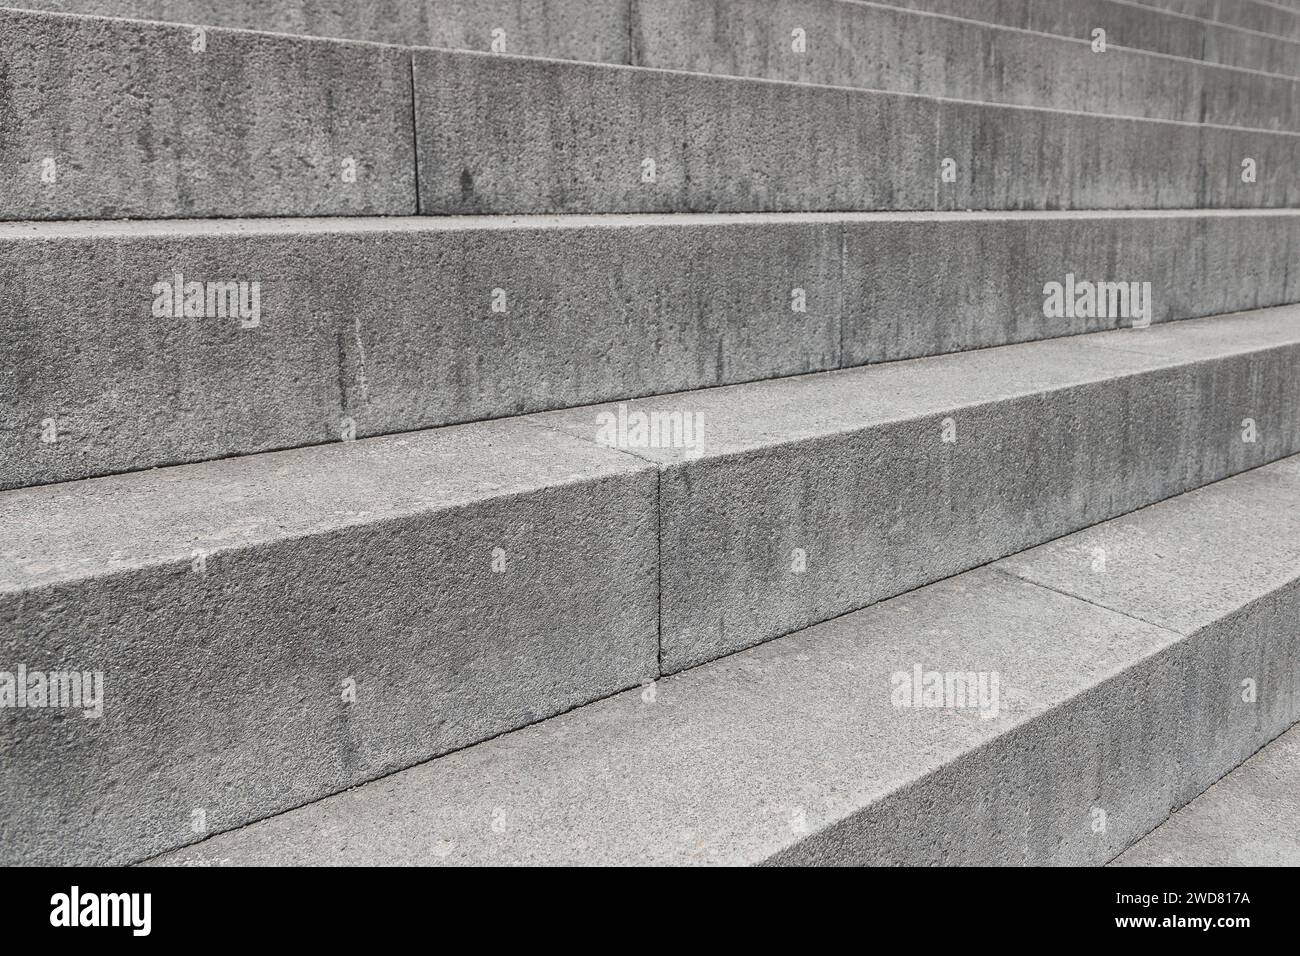 Abstract background image of cement stairs. Close-up view of the steps. Stock Photo